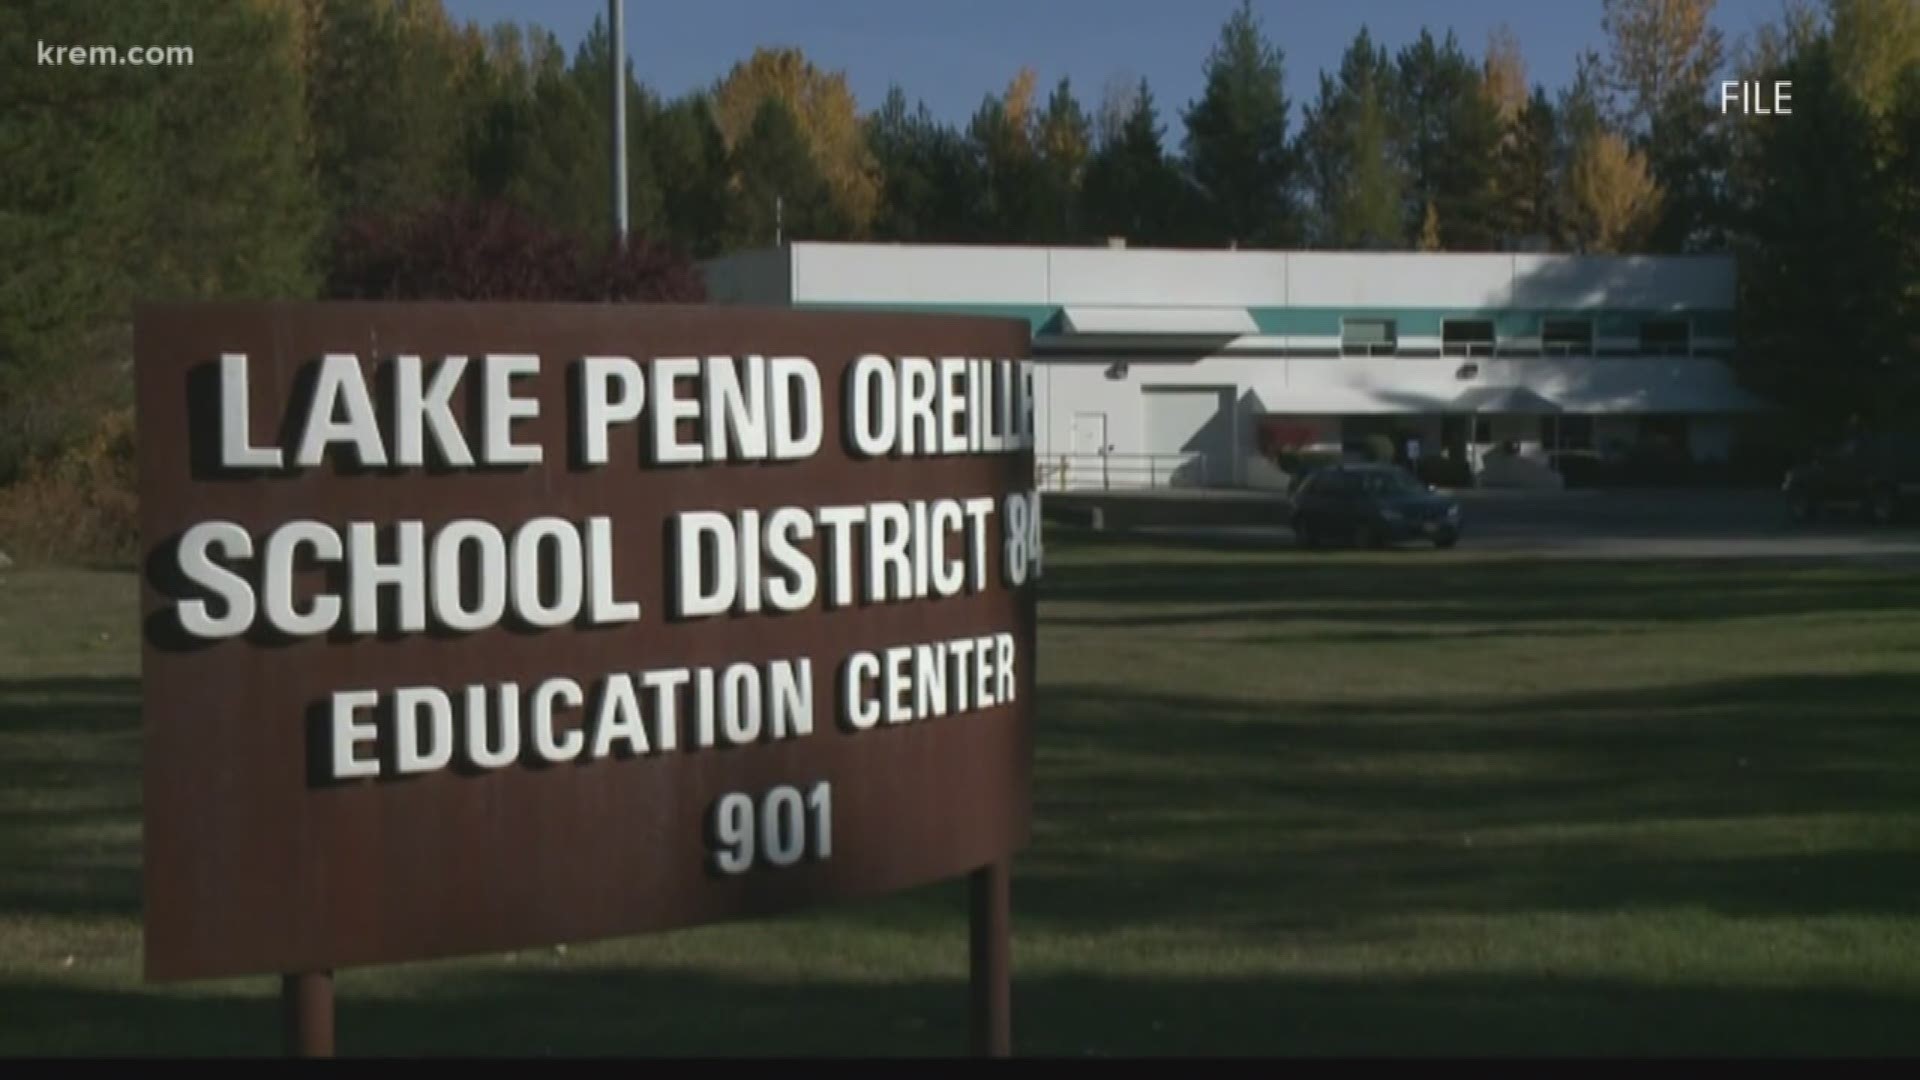 Voters narrowly approved a $12.7 million a year supplemental levy for the Lake Pend Oreille School District.